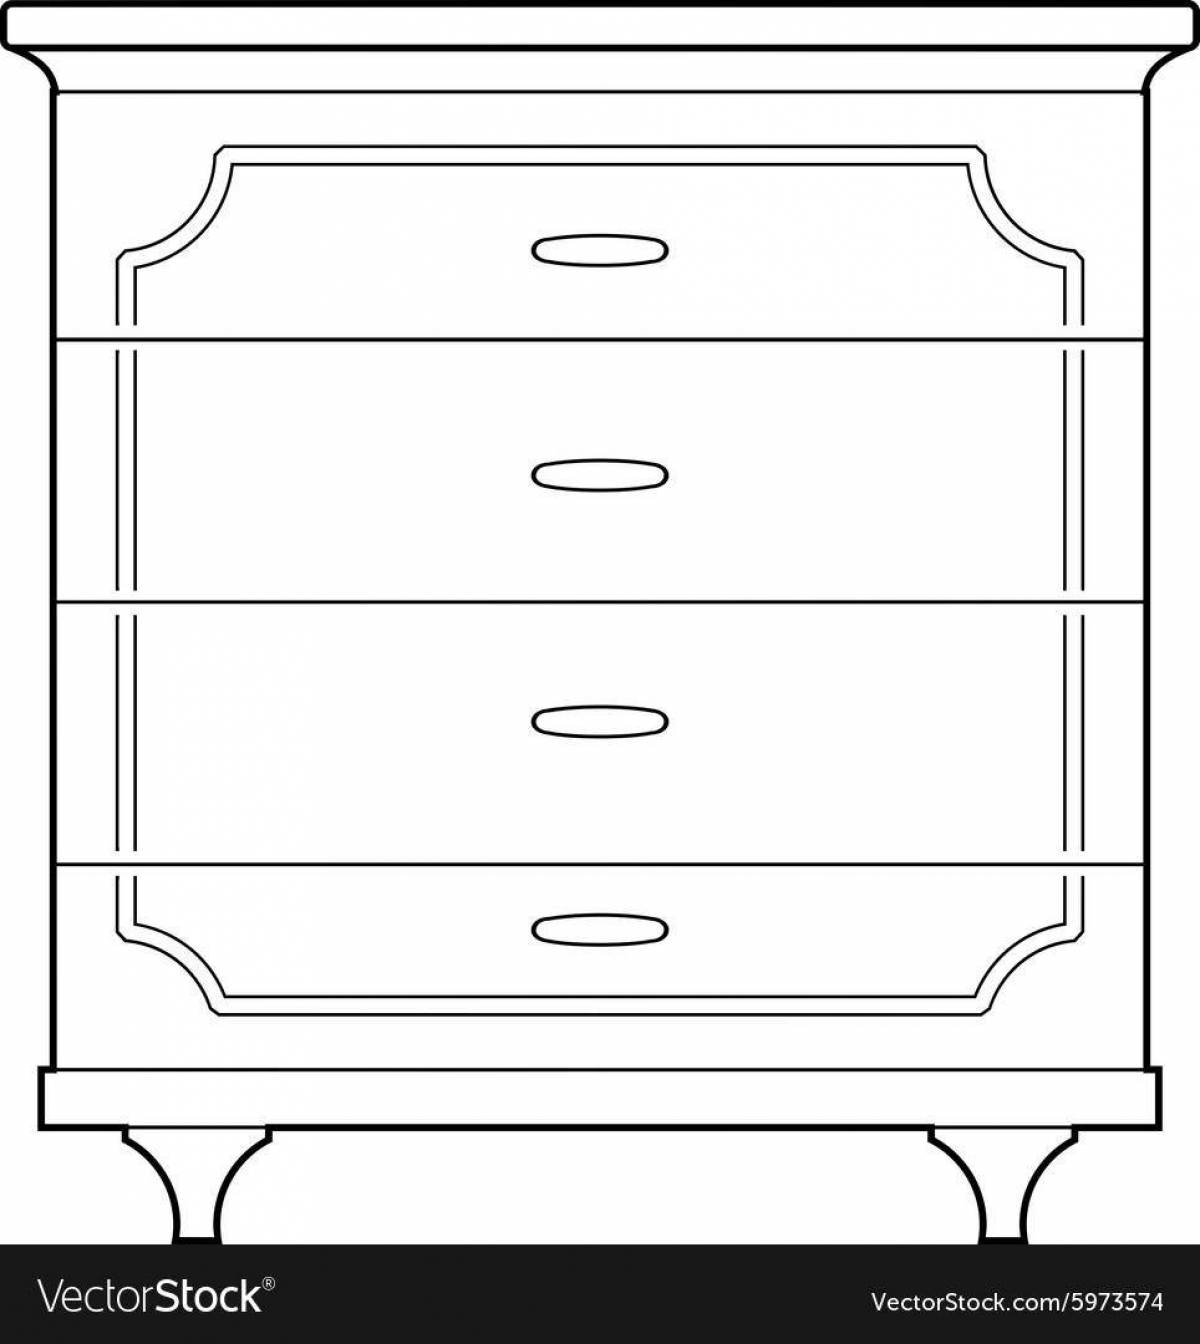 Majestic nightstand coloring page